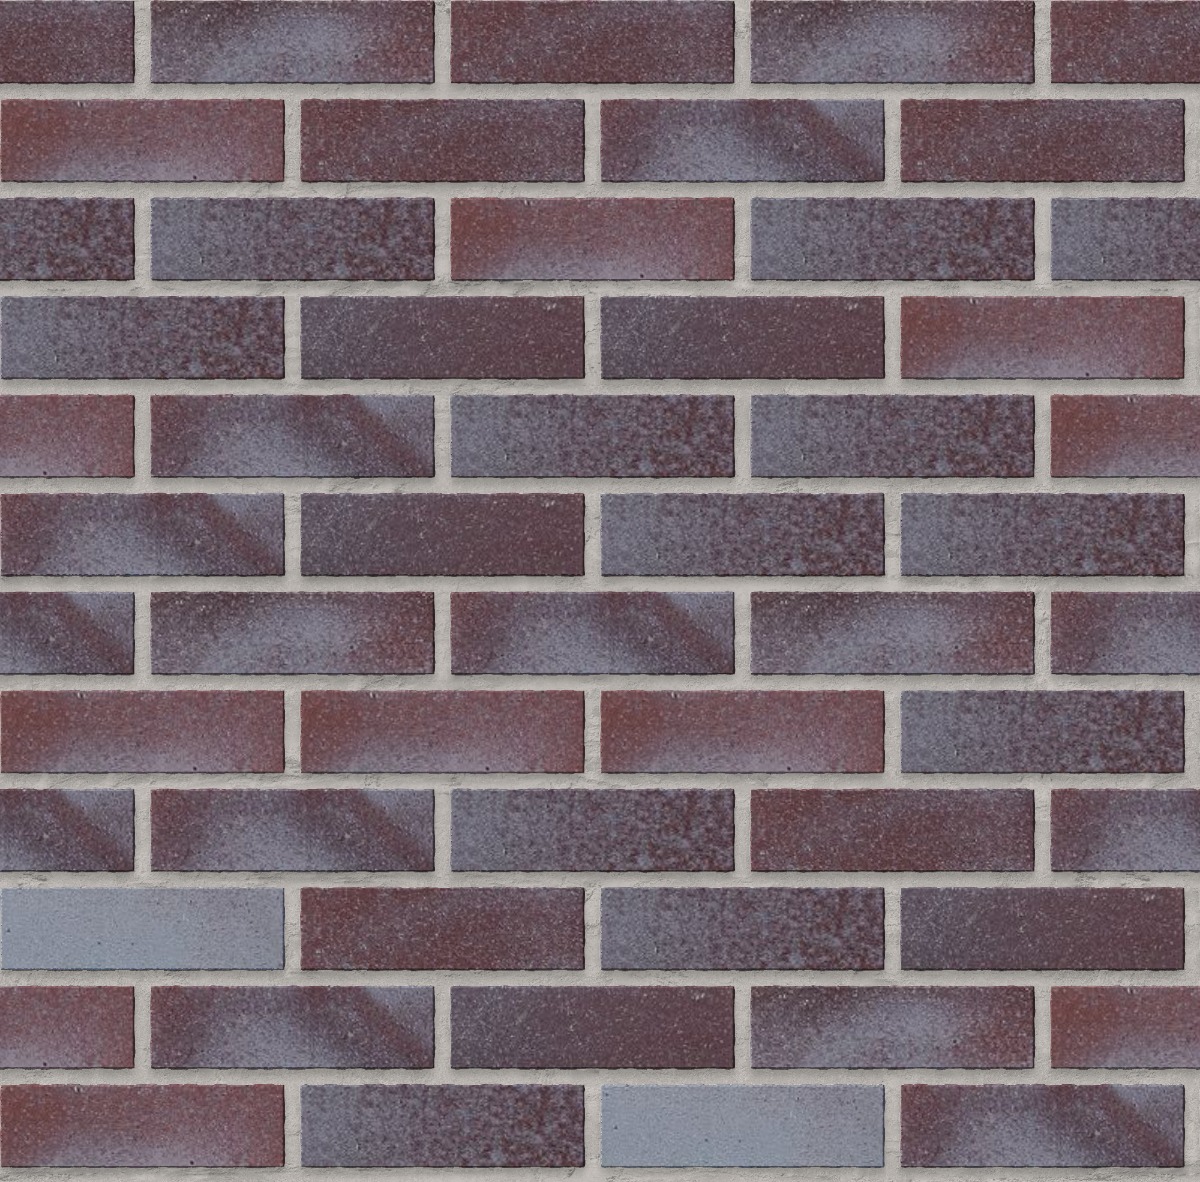 A seamless brick texture with ashberry smooth units arranged in a Stretcher pattern